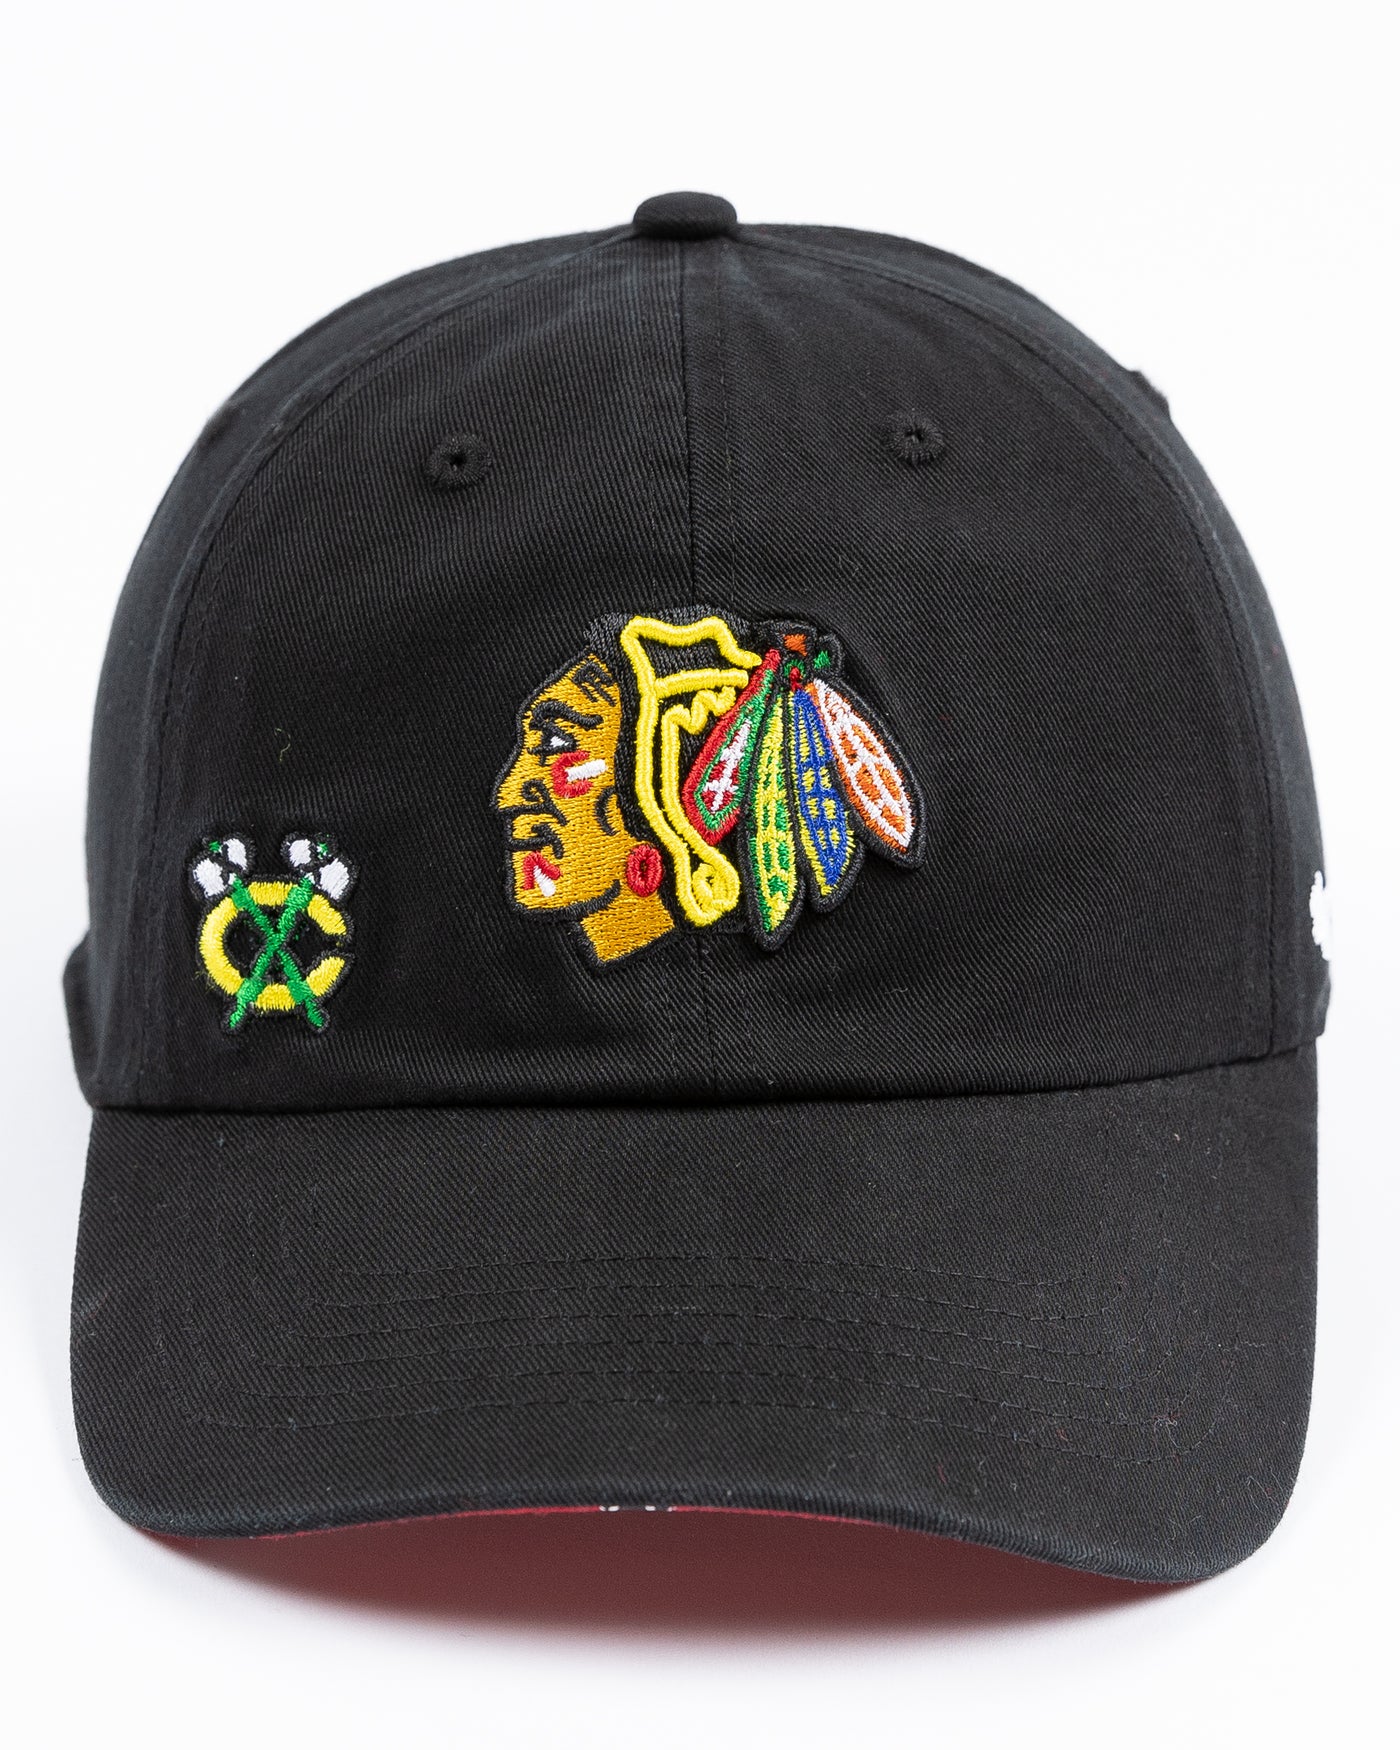 black ladies '47 brand clean up cap with Chicago Blackhawks primary and secondary logos embroidered on the front - front lay flat